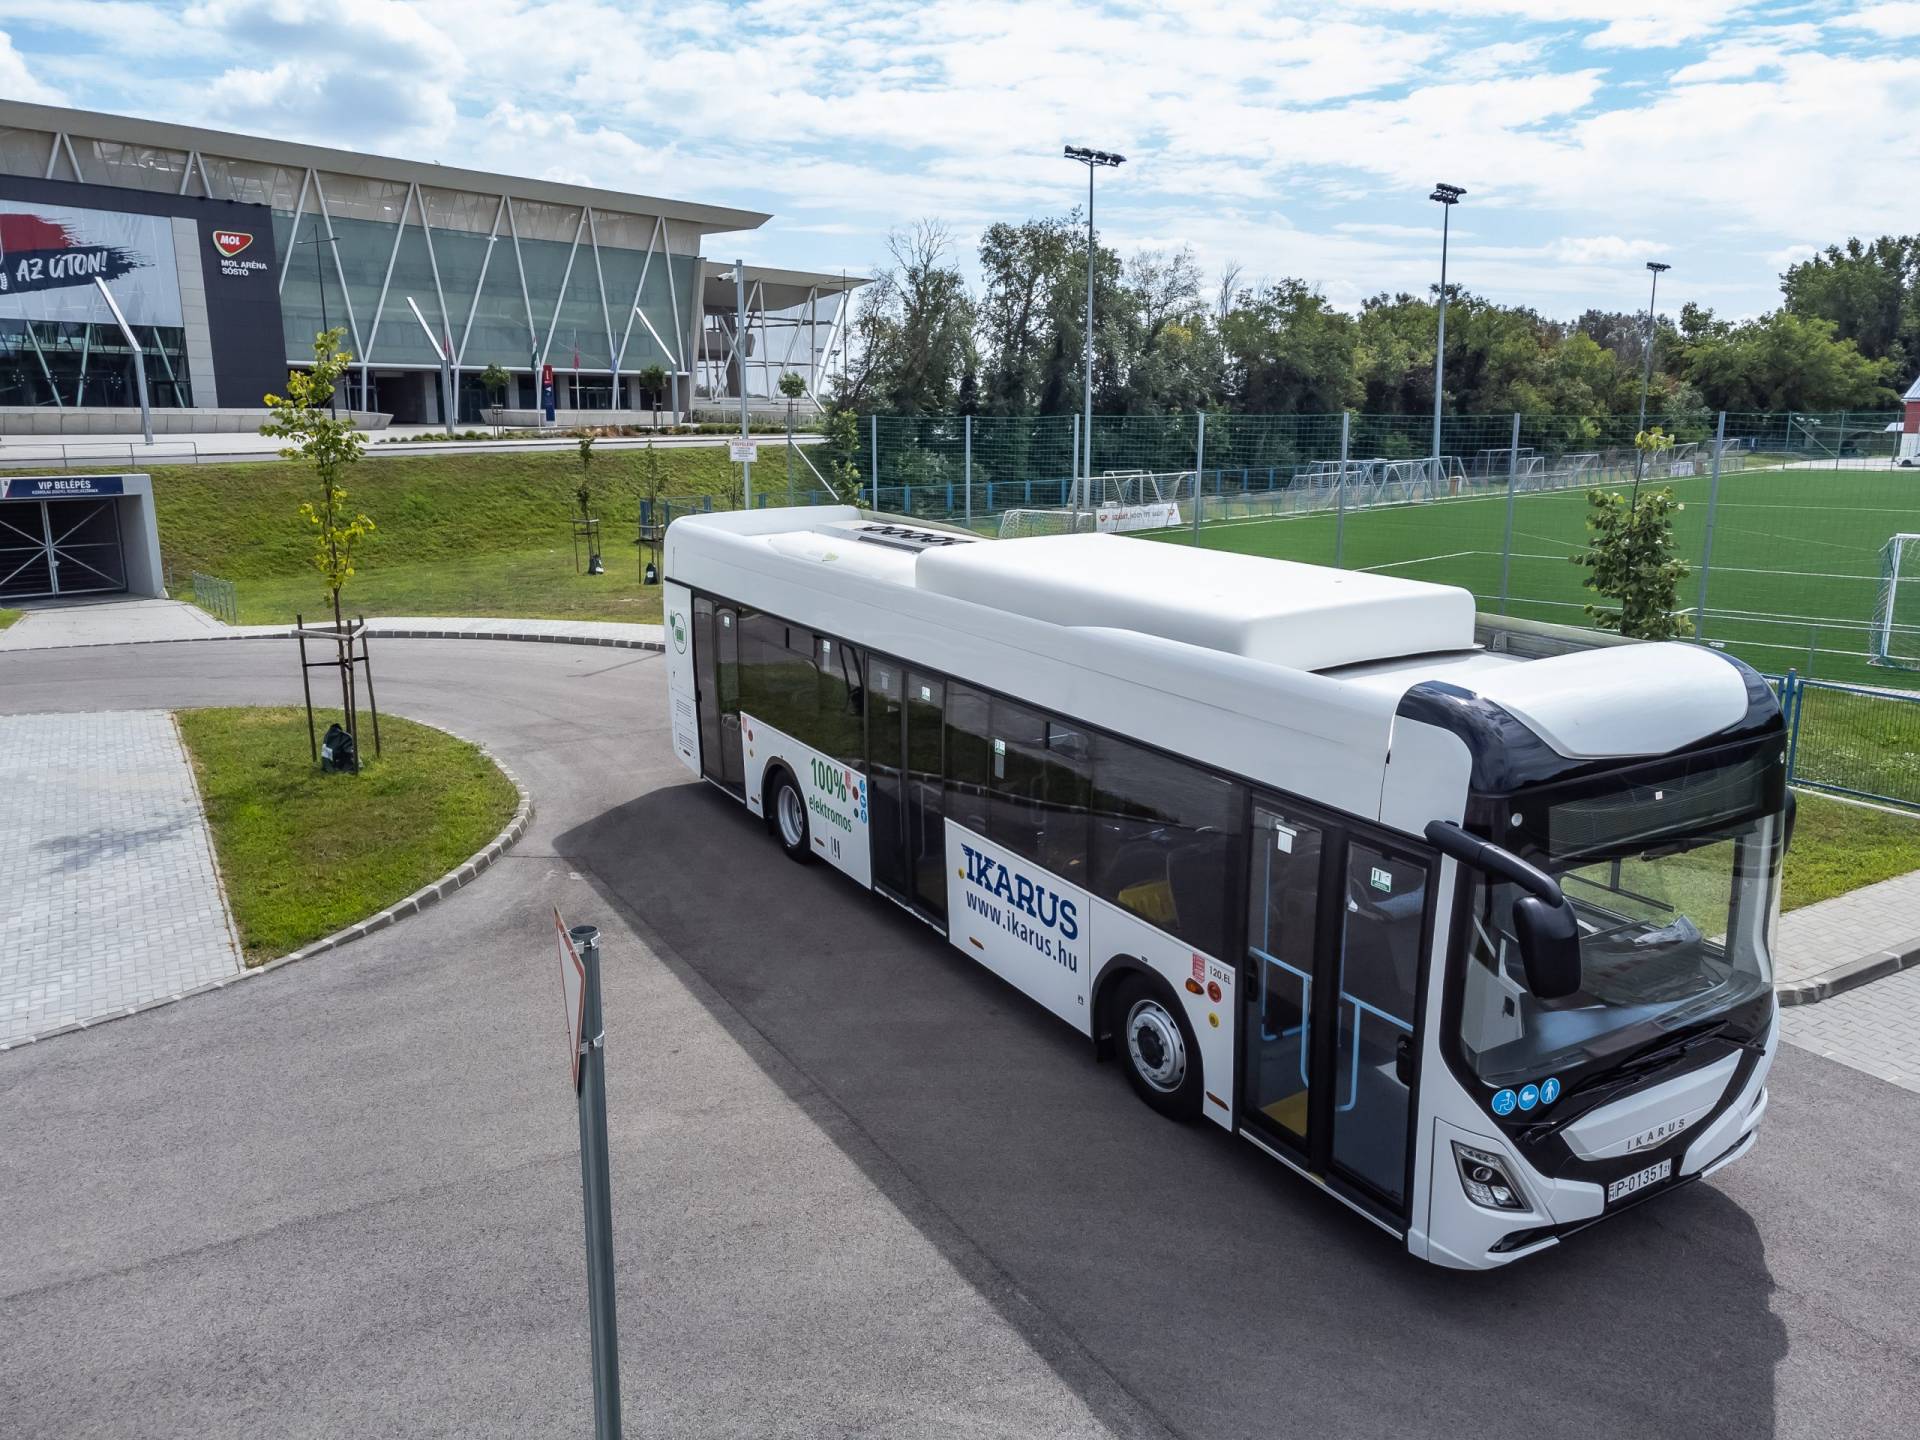 Ikarus is back to Germany. Two new 2-door 120e buses leased - Sustainable  Bus